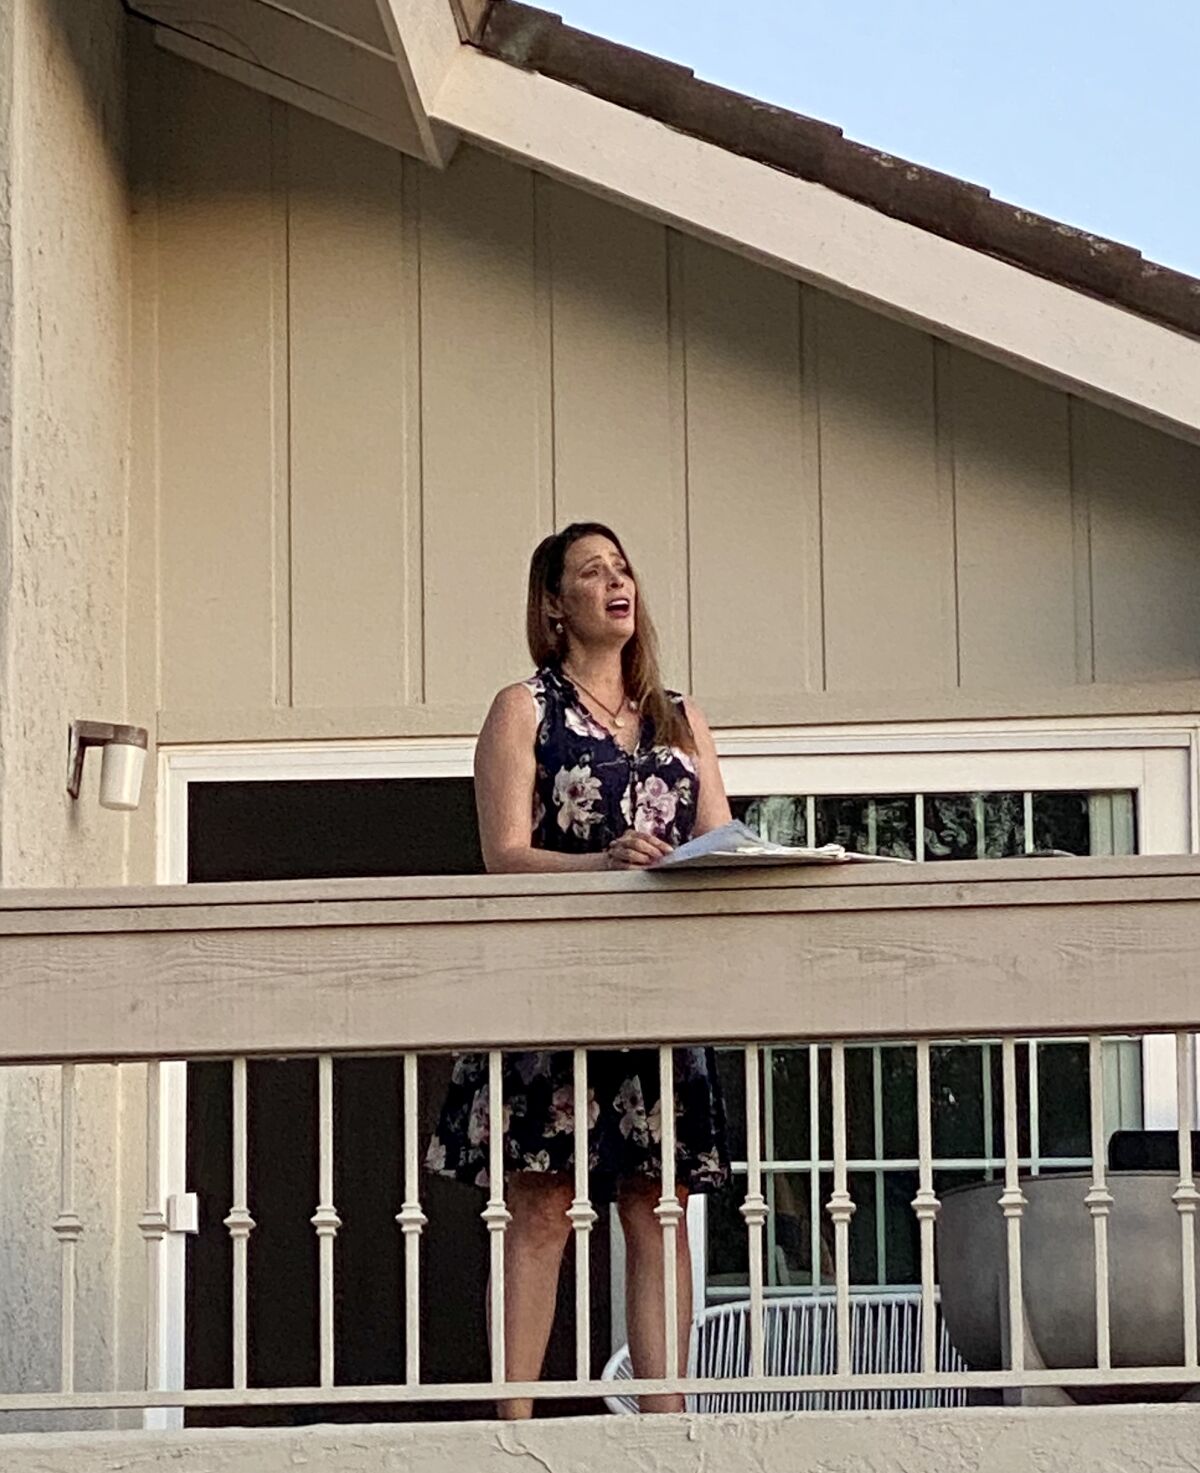 La Jolla resident and professional opera singer Alina Mullen performs for her neighbors from her balcony.